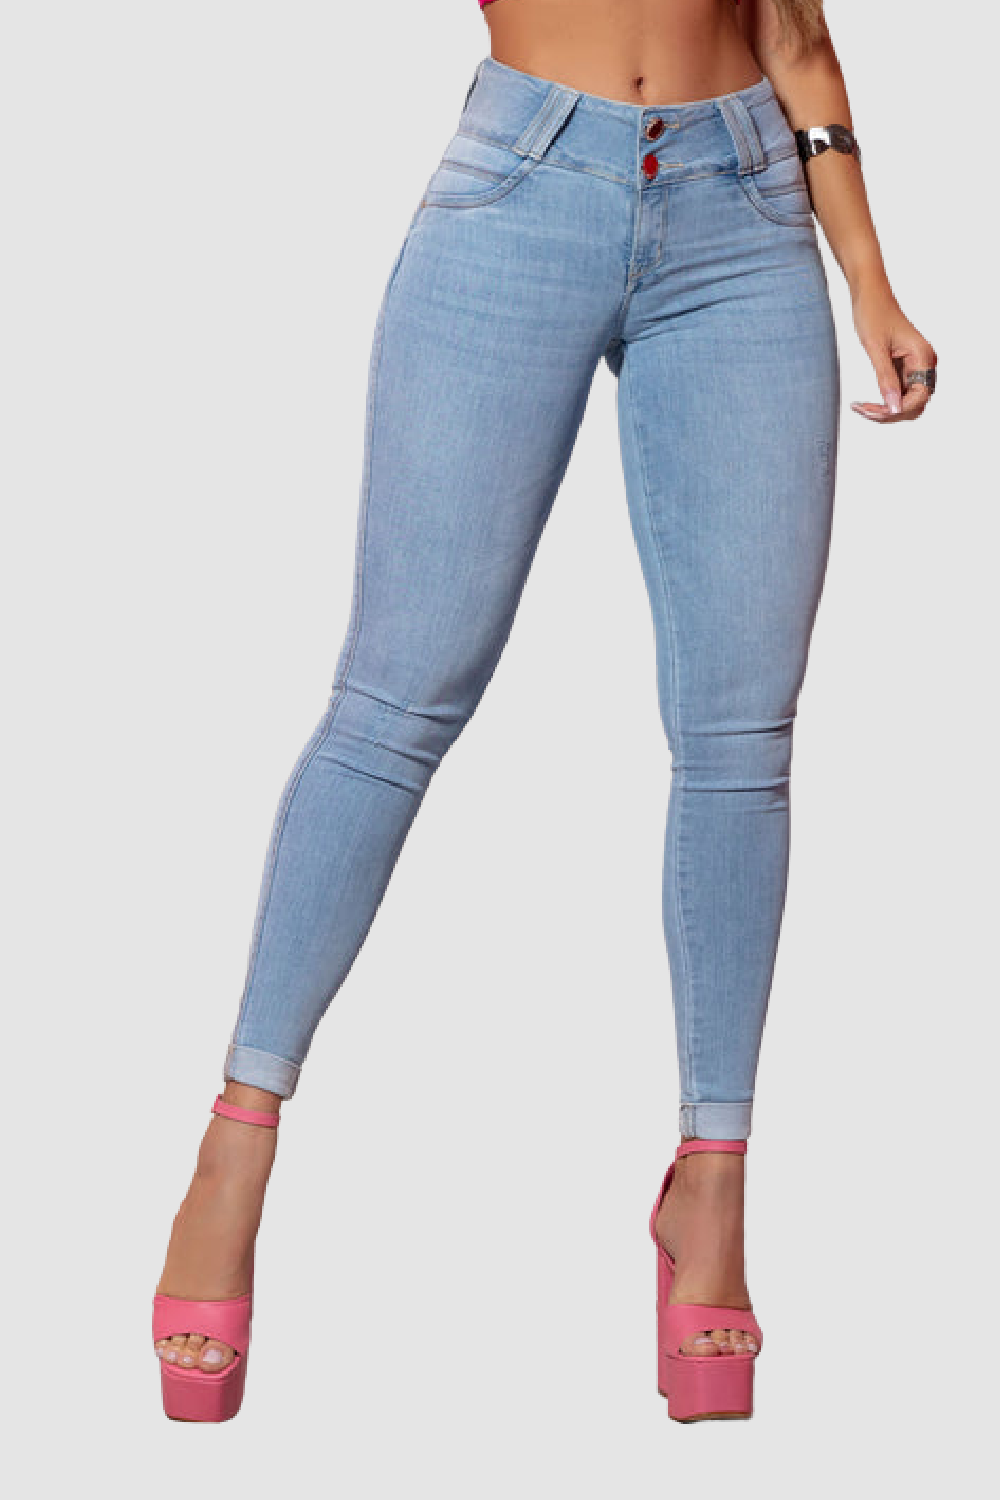 Jeans – Light Skinny URock Couture Wash